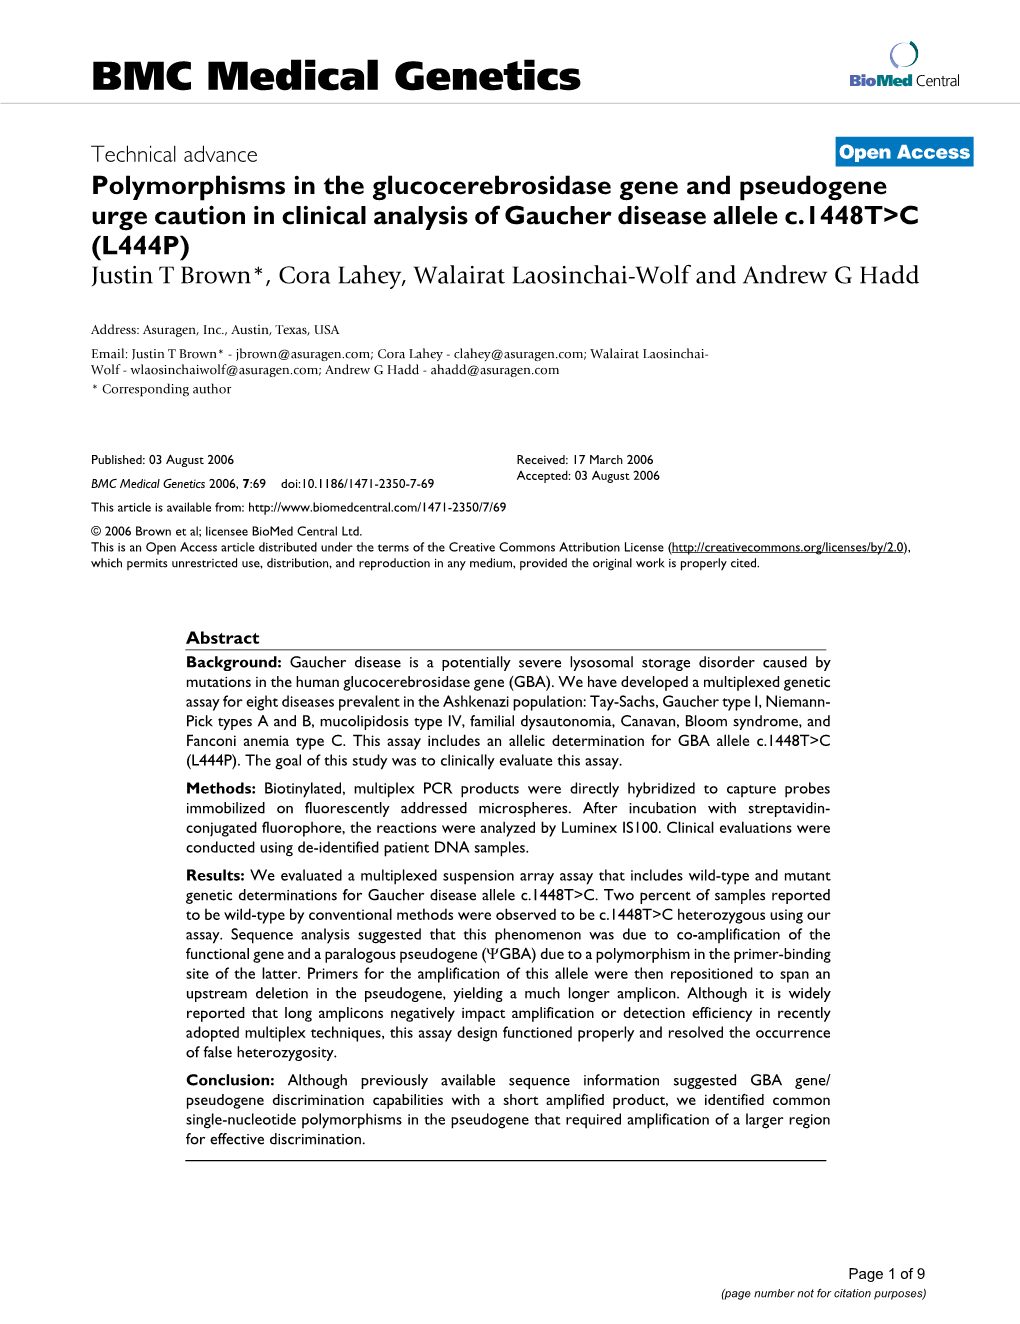 Polymorphisms in the Glucocerebrosidase Gene And